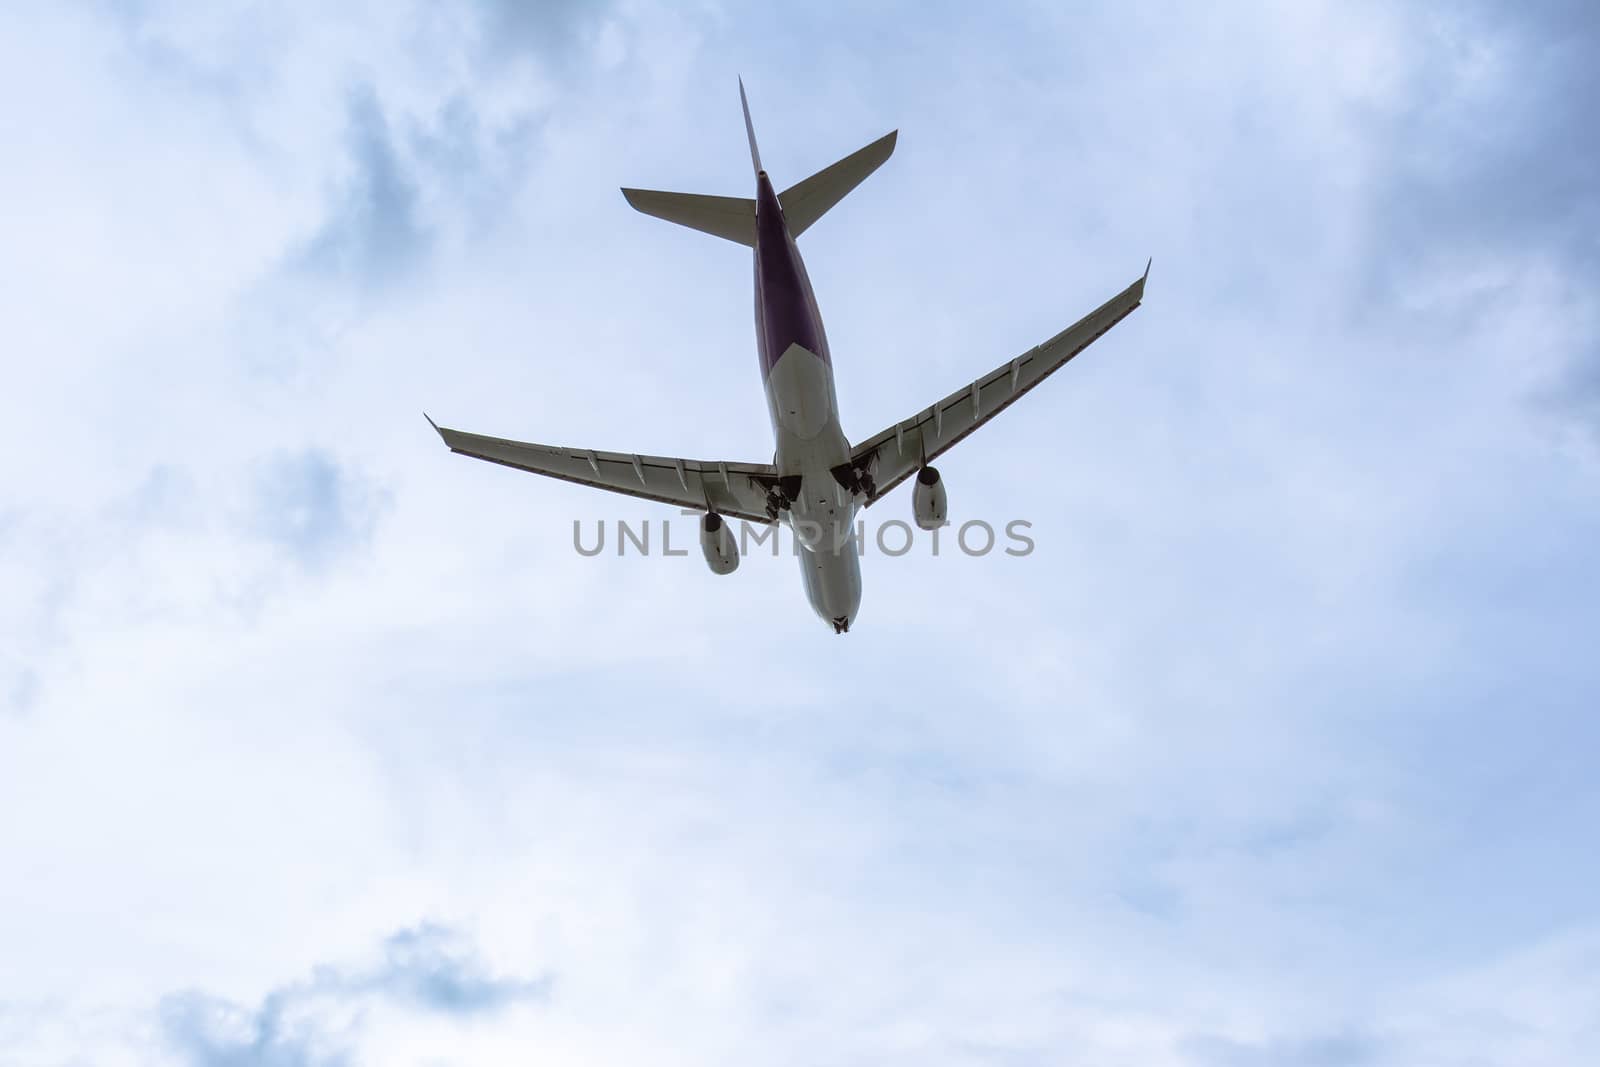 Under view of Airplane in the cloudy sky for background by ahimaone